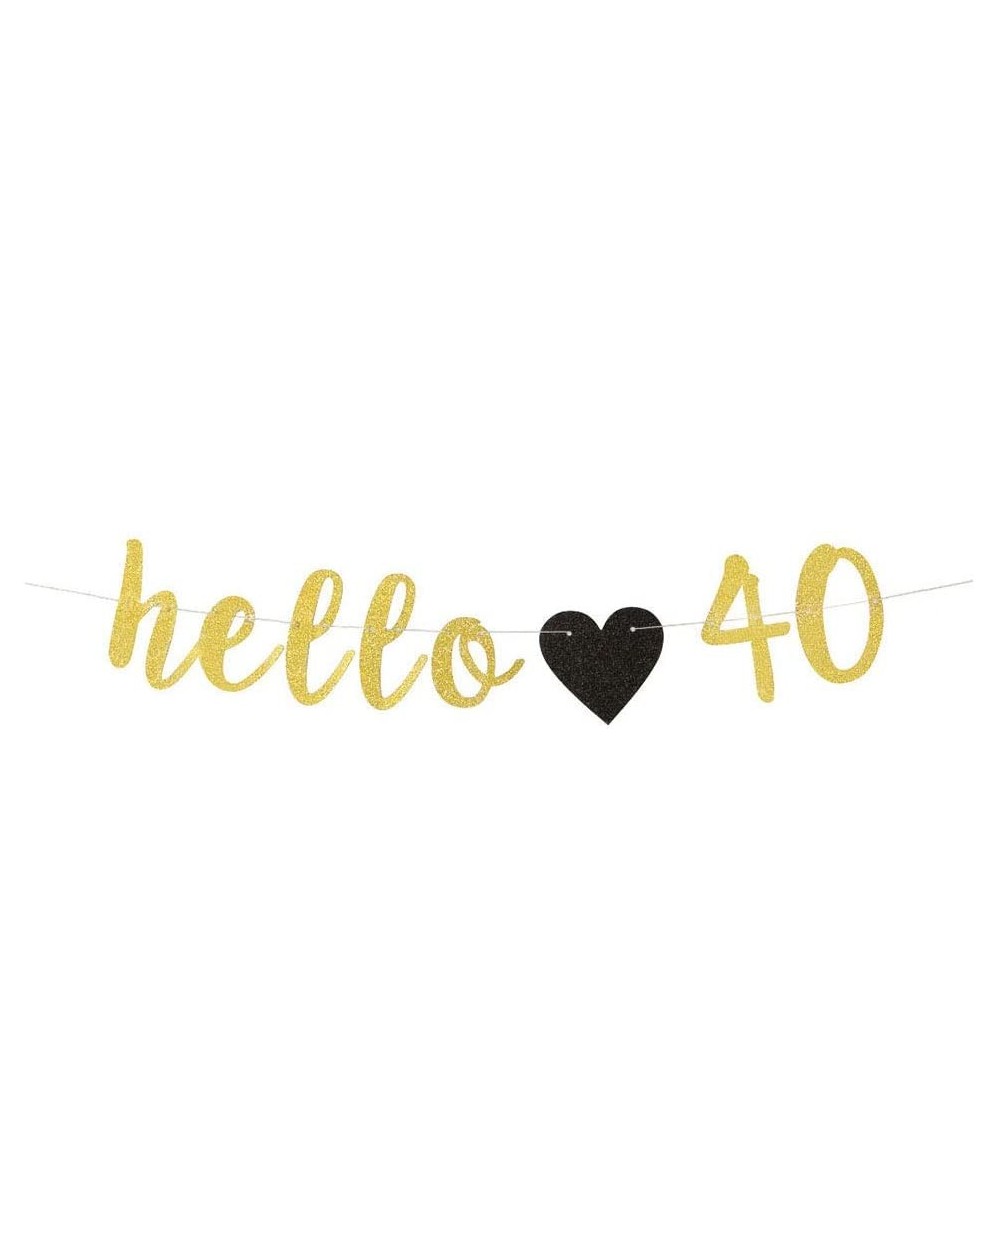 Banners Hello 40 Banner for Happy 40th Birthday/Anniversary Banner- Cheers to 40 Years Party Decoration Supplies Gold Glitter...